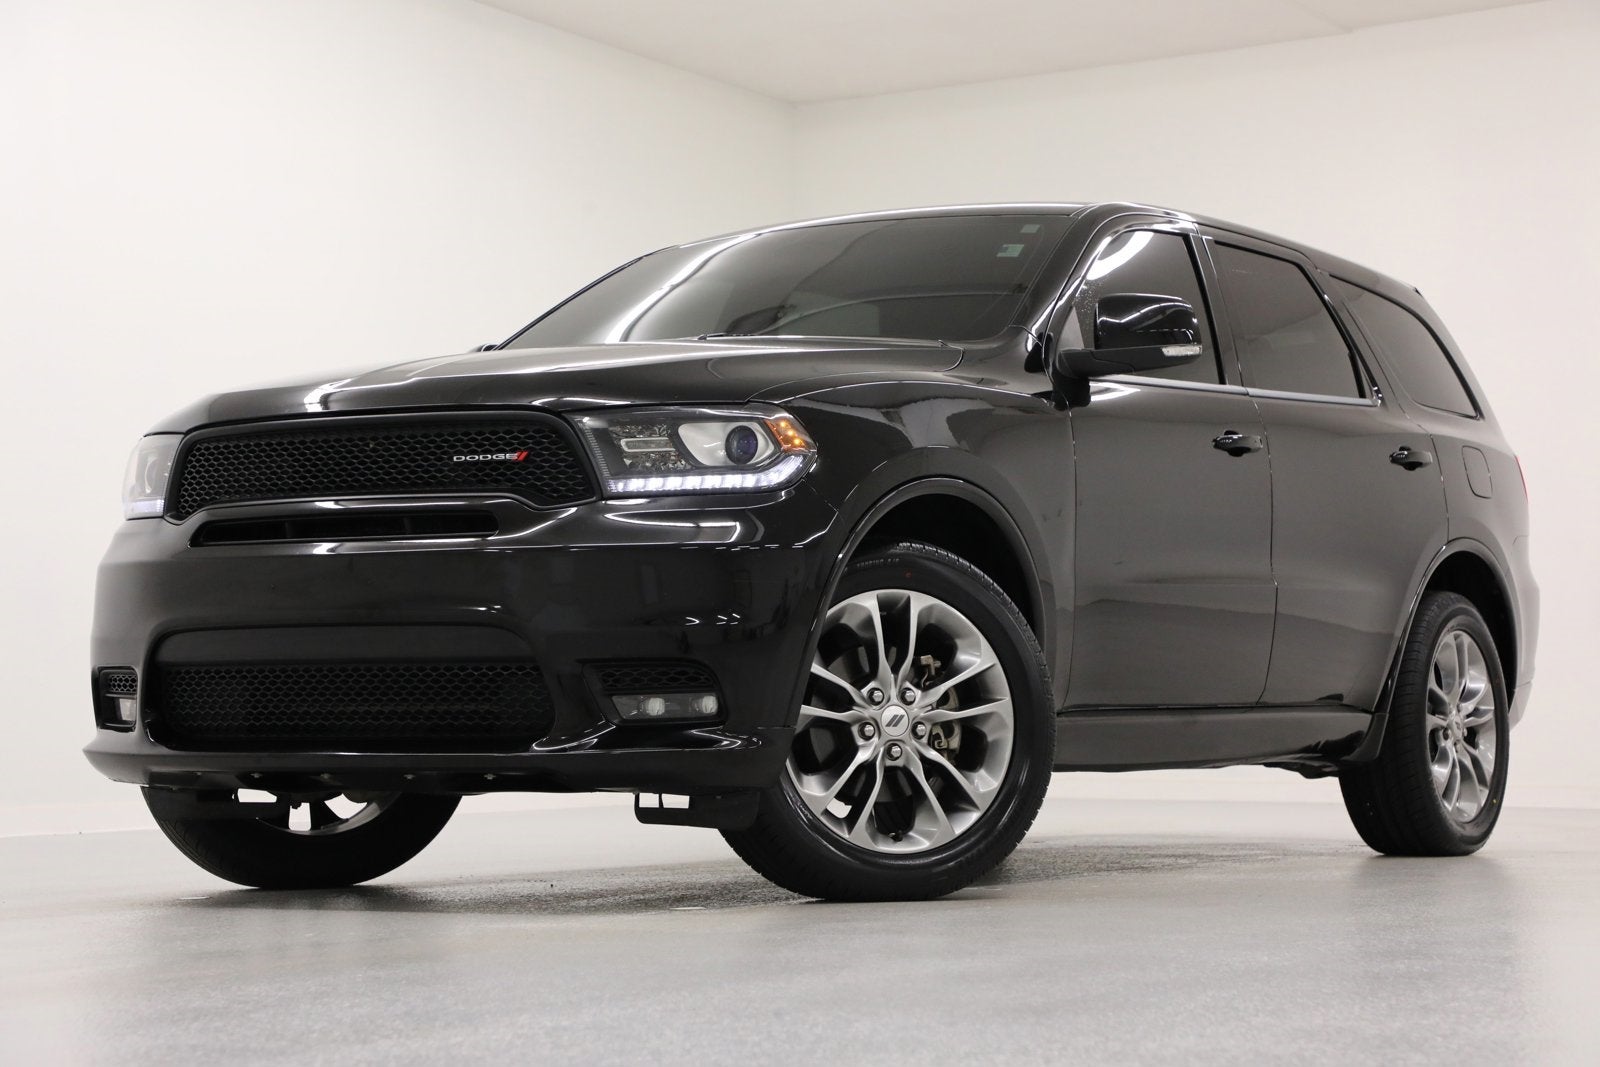 2019 Dodge Durango GT Plus AWD Heated Black Leather Heated Rear Seats Power Liftgate 20 IN Wheels Dual Exhaust Camera